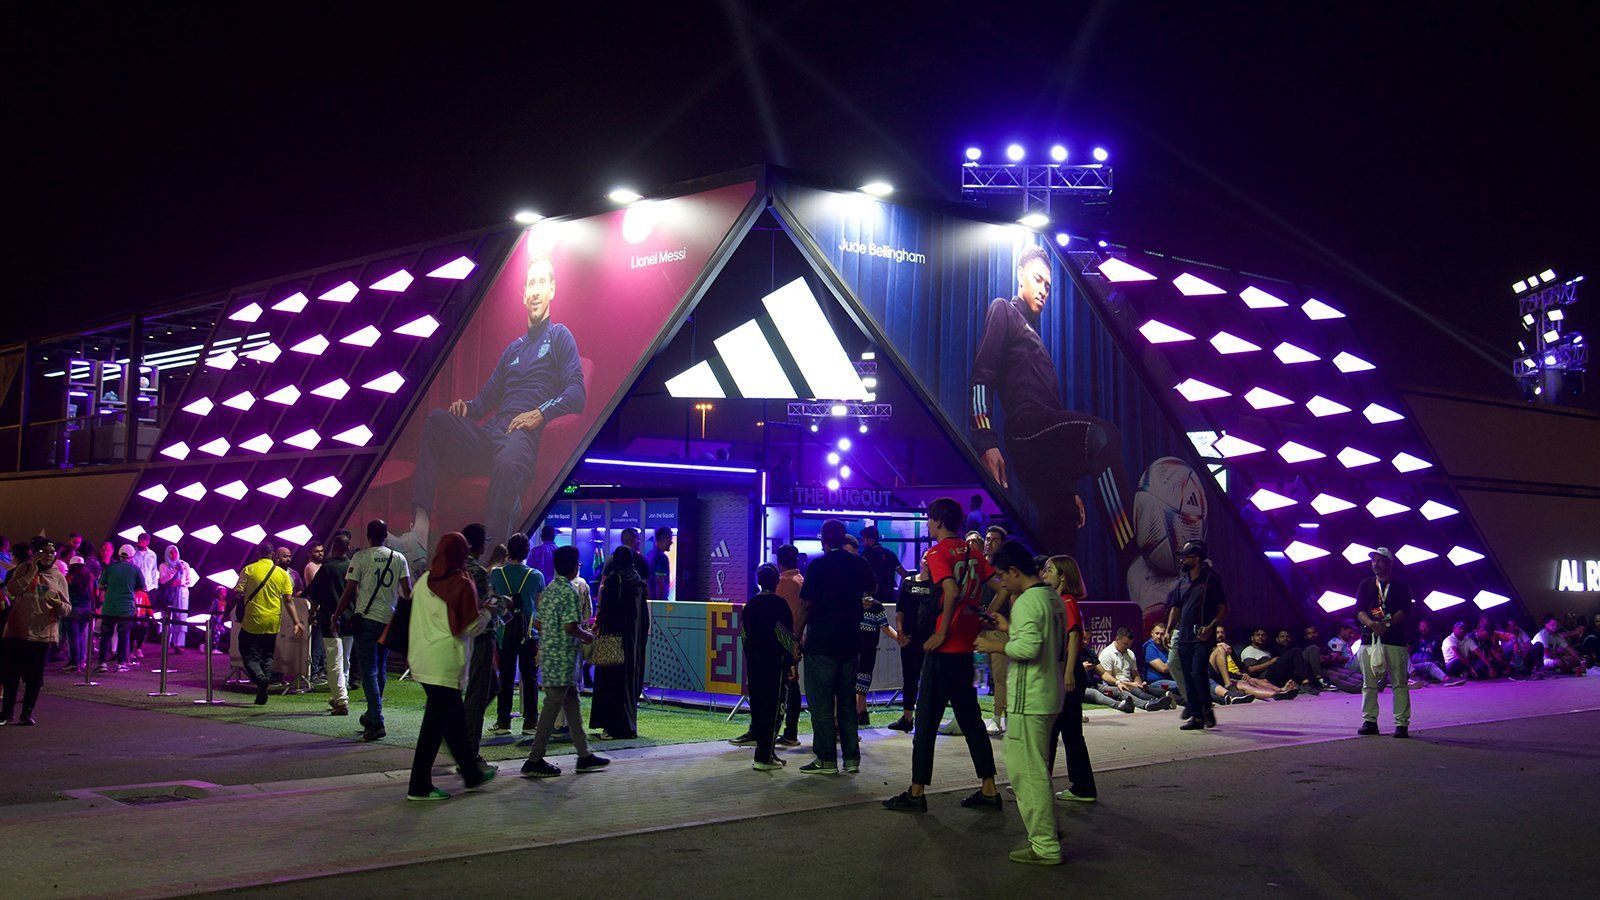 A large structure is erected from the ground with the adidas logo brightly illuminated at the top. It is dark out and vibrant blue and red color tones project from the structure and the entrance where crowds of people are walking in.